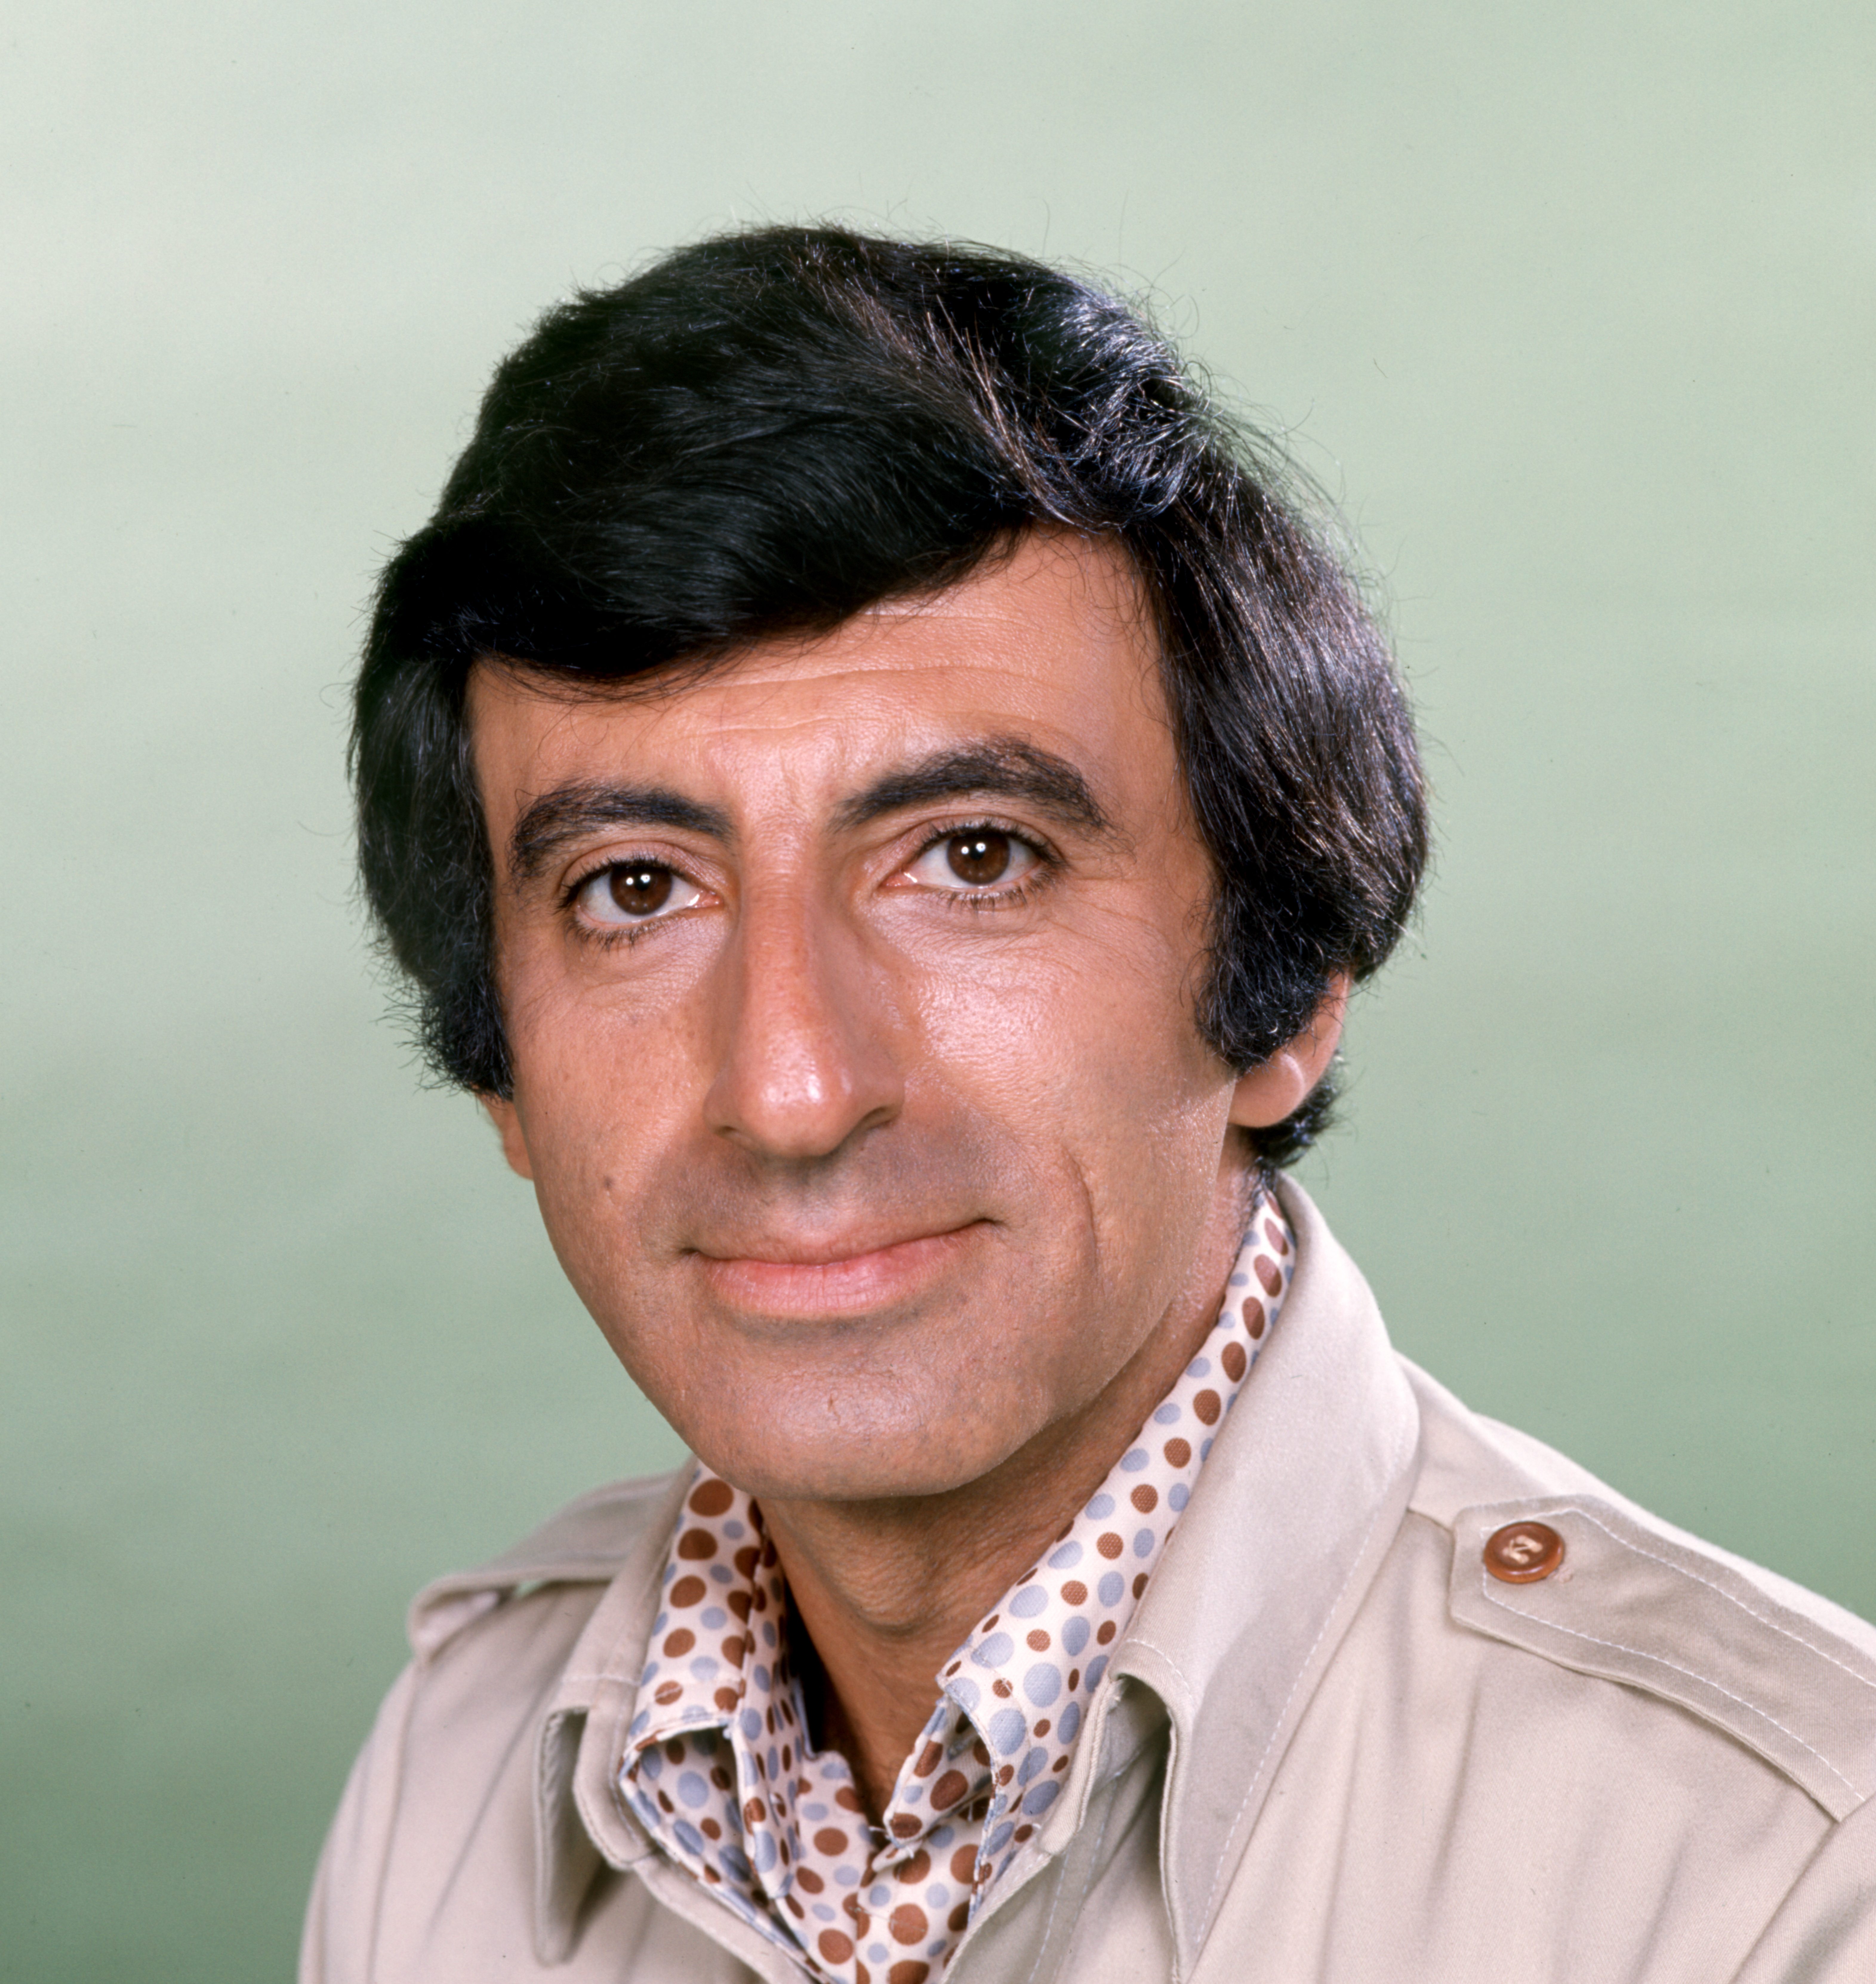 Jamie Farr as Maxwell Q. Klinger on "M*A*S*H" in 1977. | Source: Getty Images